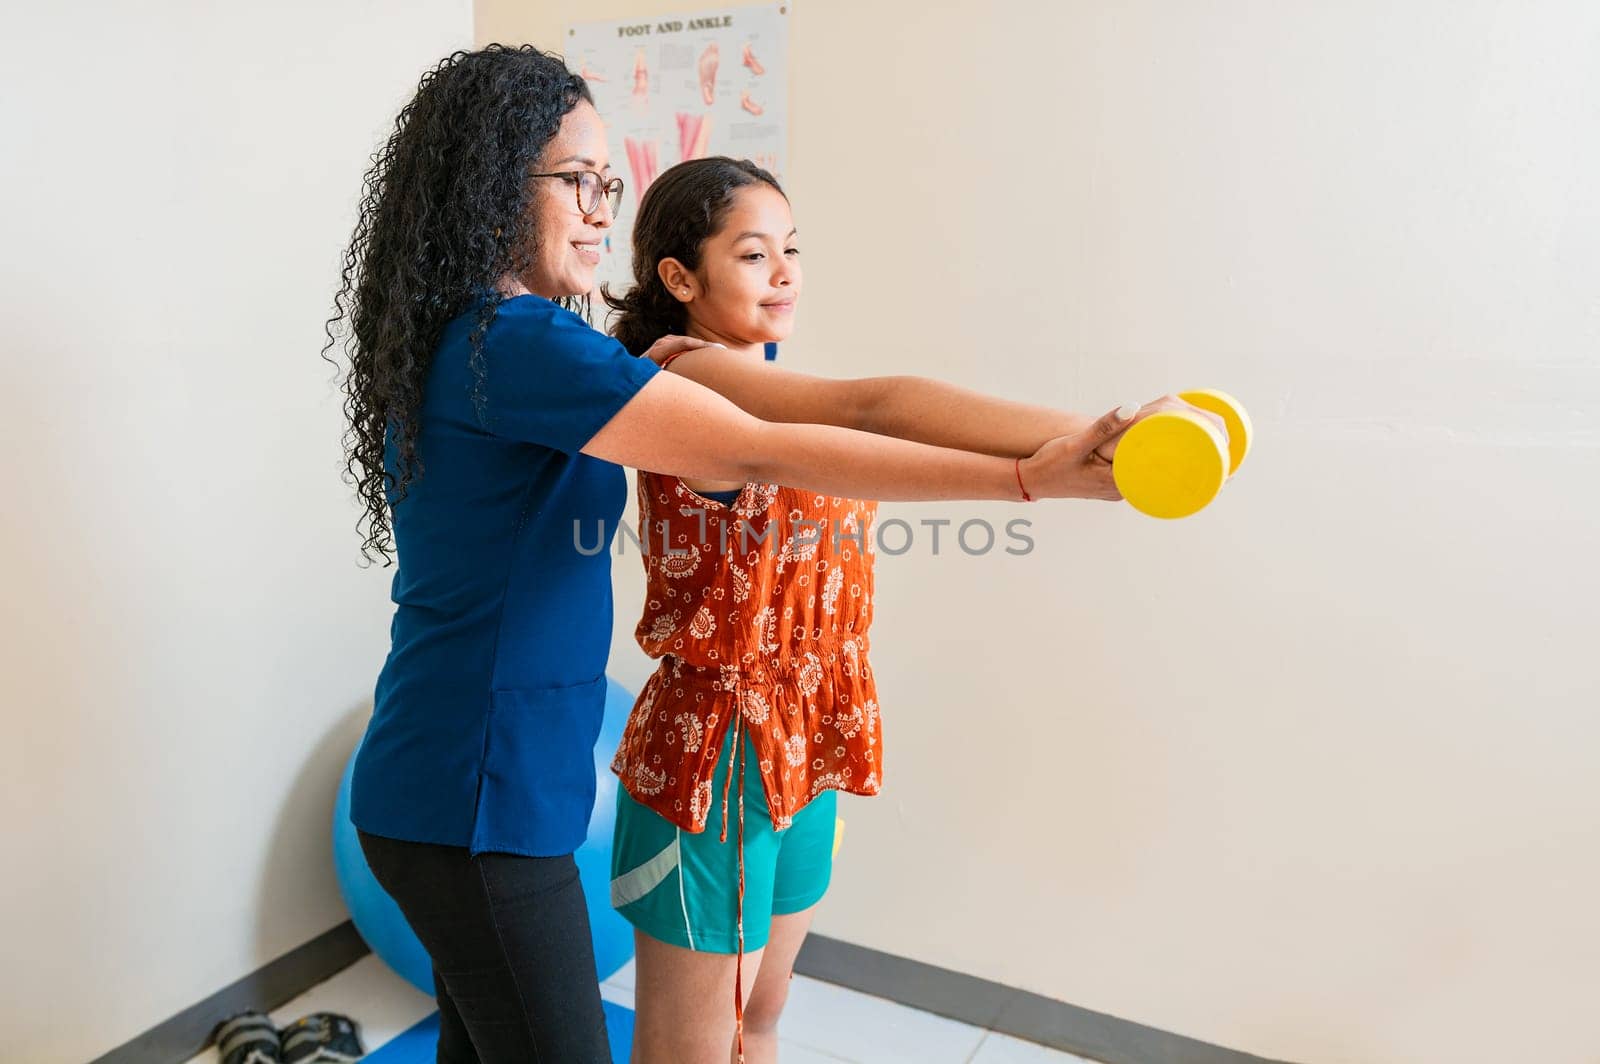 Rehabilitation physiotherapy in fitness ball. Physiotherapist helping patient with dumbbell sitting on rehabilitation ball by isaiphoto